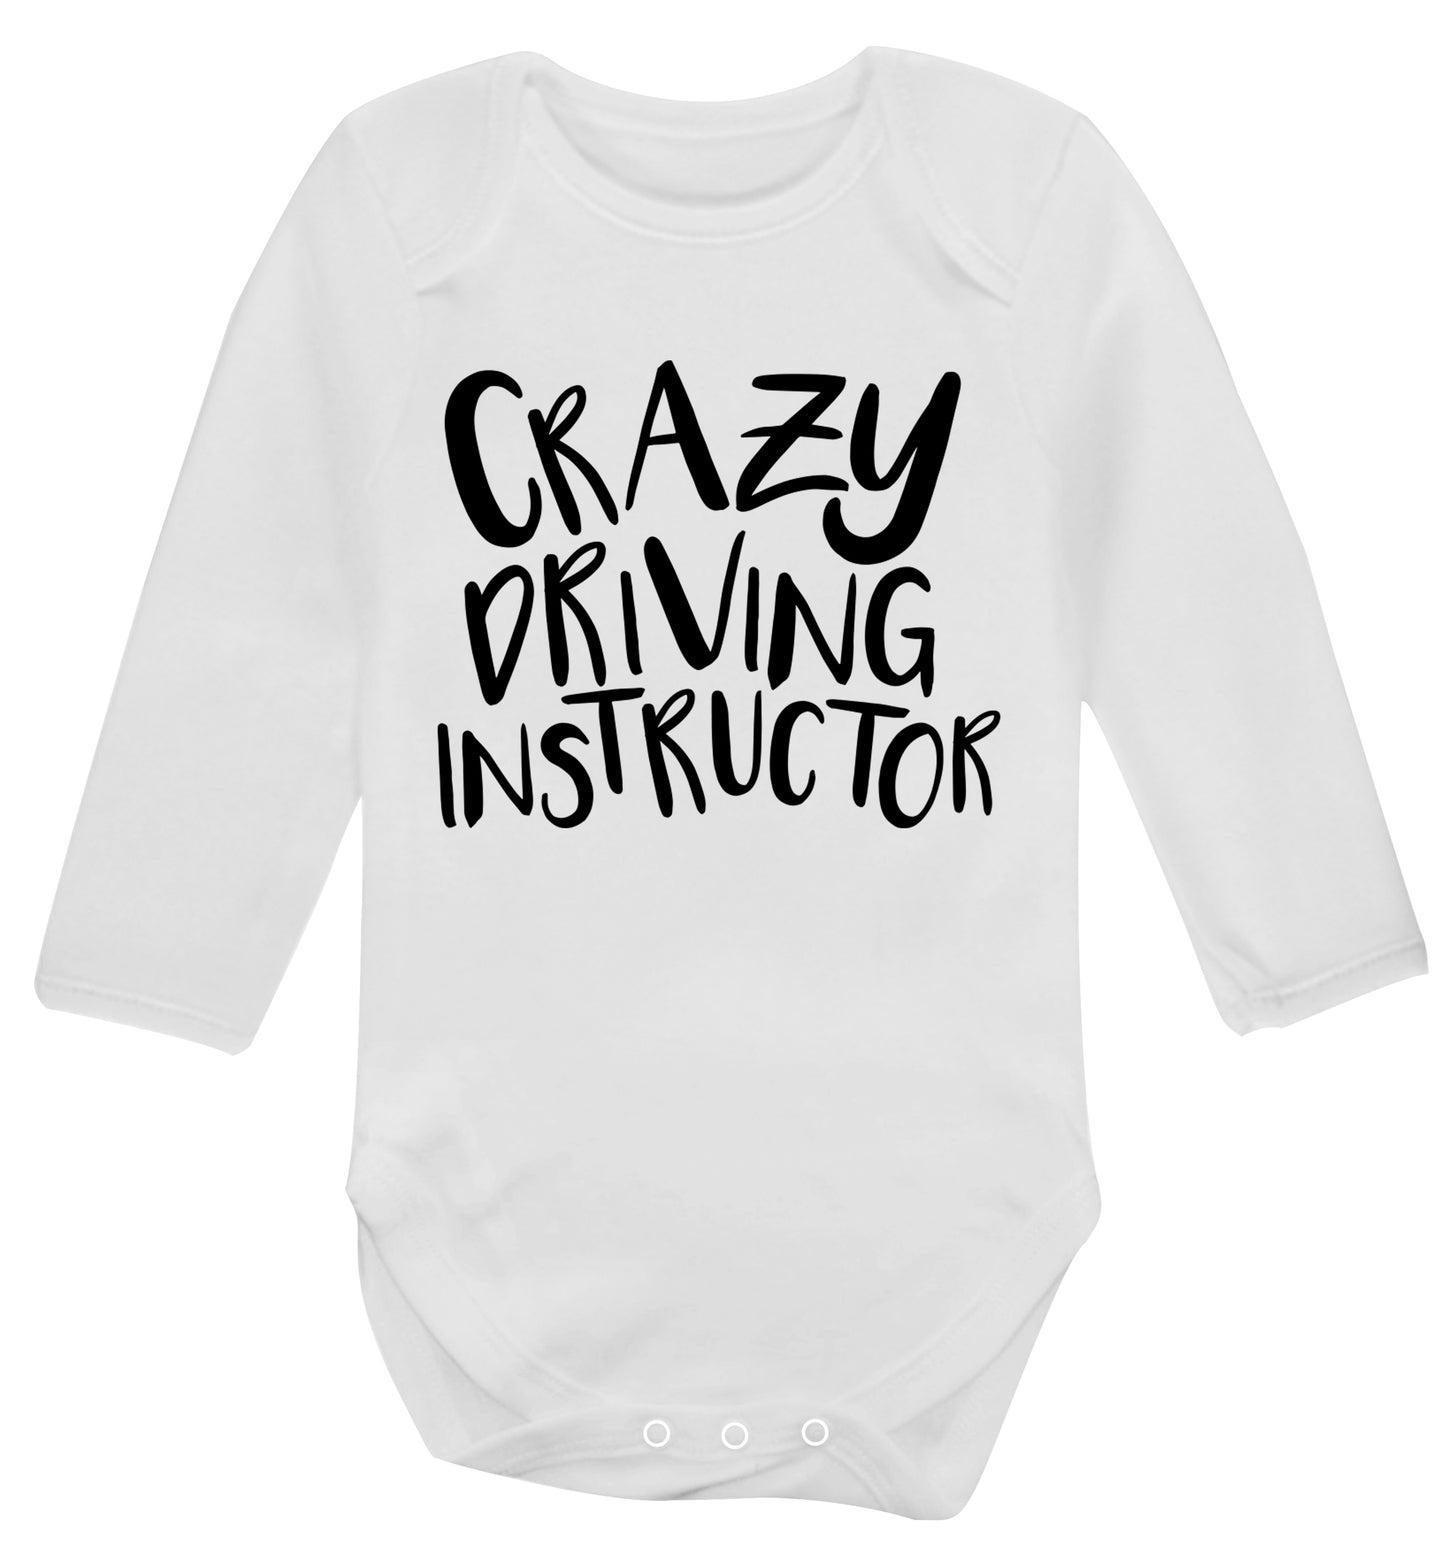 Crazy driving instructor Baby Vest long sleeved white 6-12 months